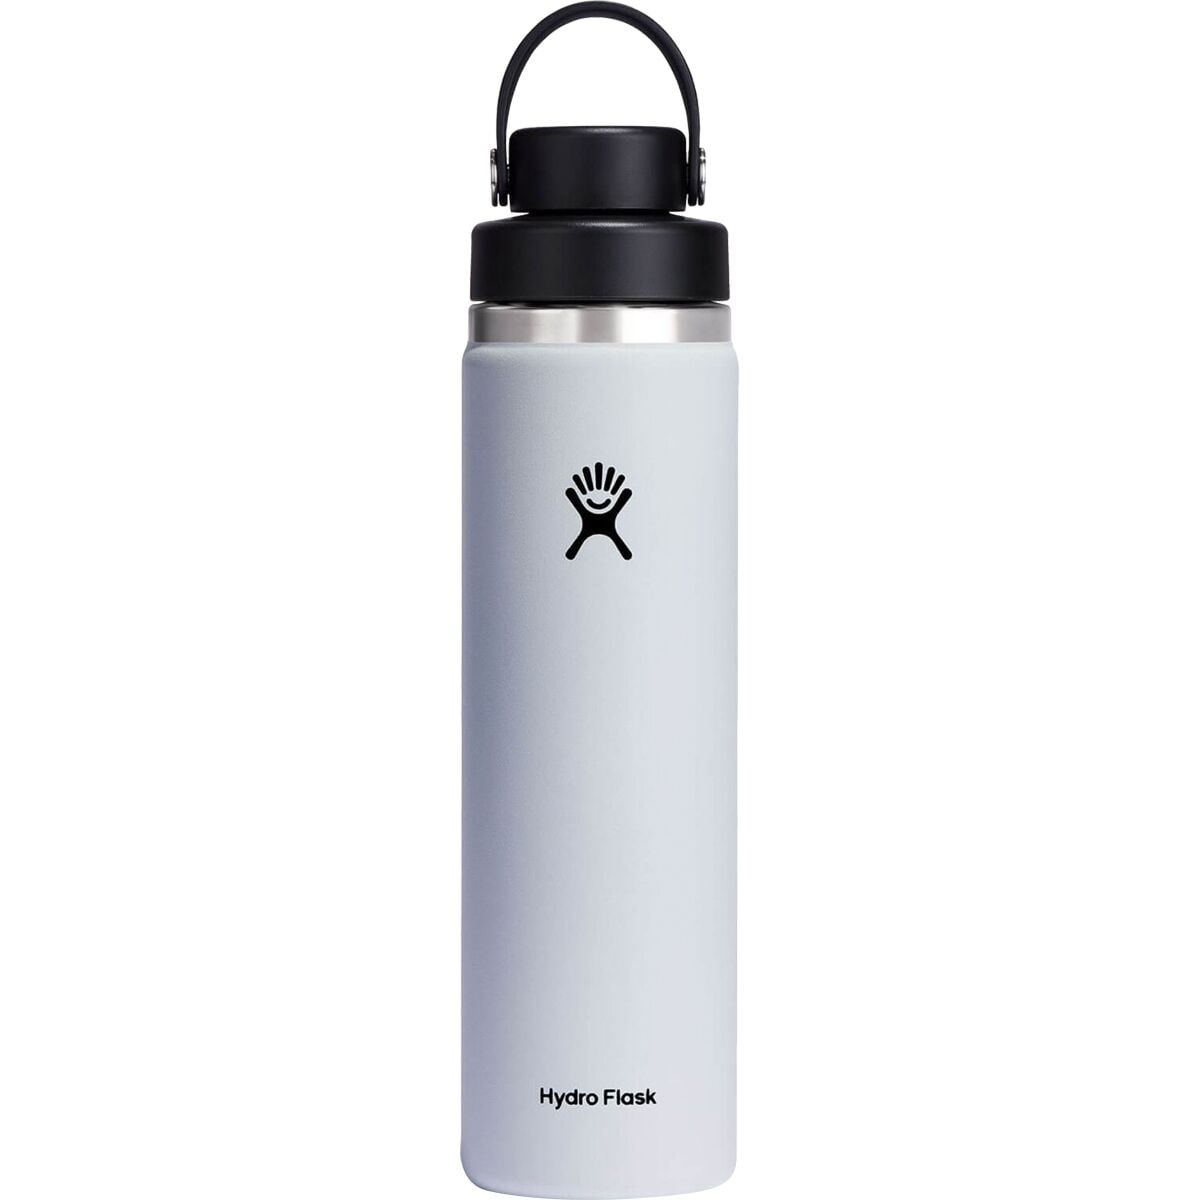 Hydro Flask 24oz Wide Mouth Water Bottle + Chug Cap